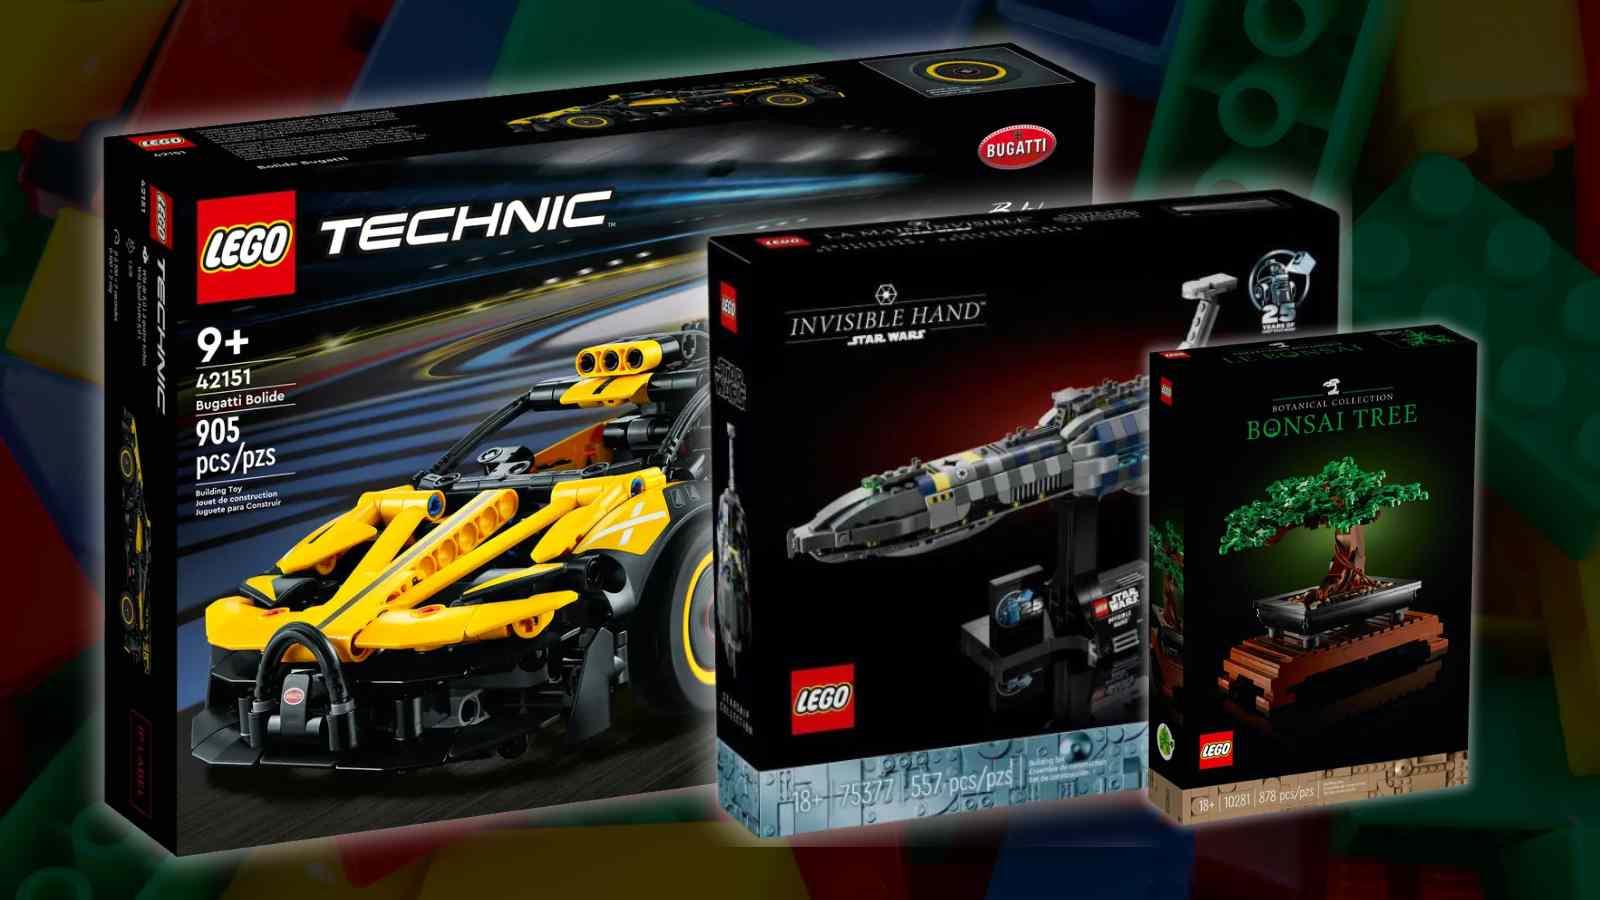 Three of the best LEGO sets for under $50